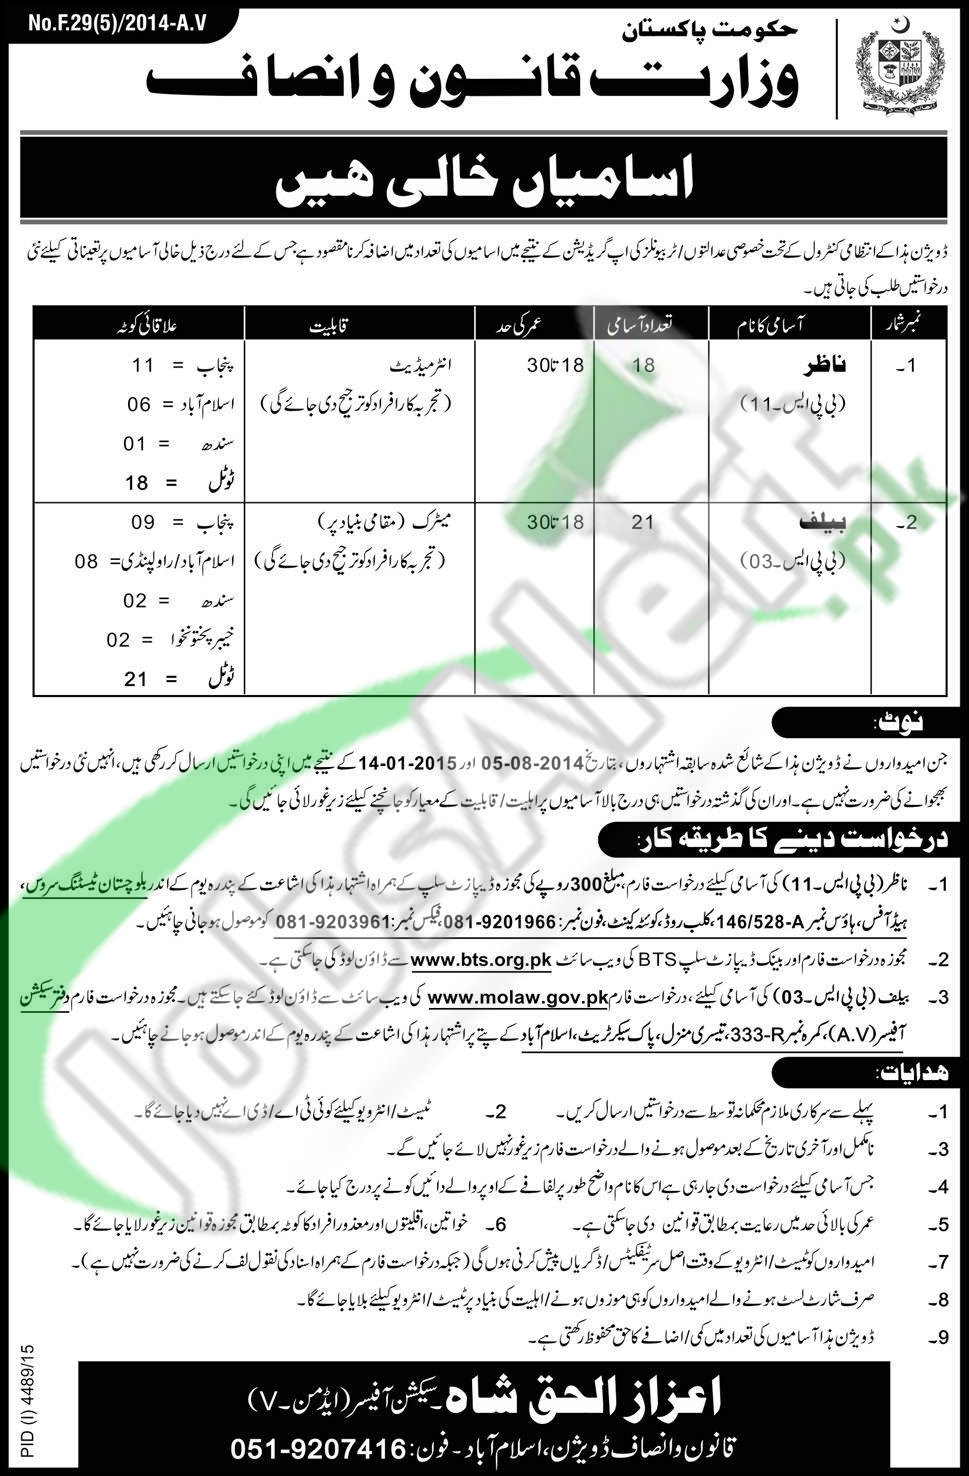 Situations Vacant in Ministry of Law Justice and Human Rights 2016 Islamabad Application Forms Latest